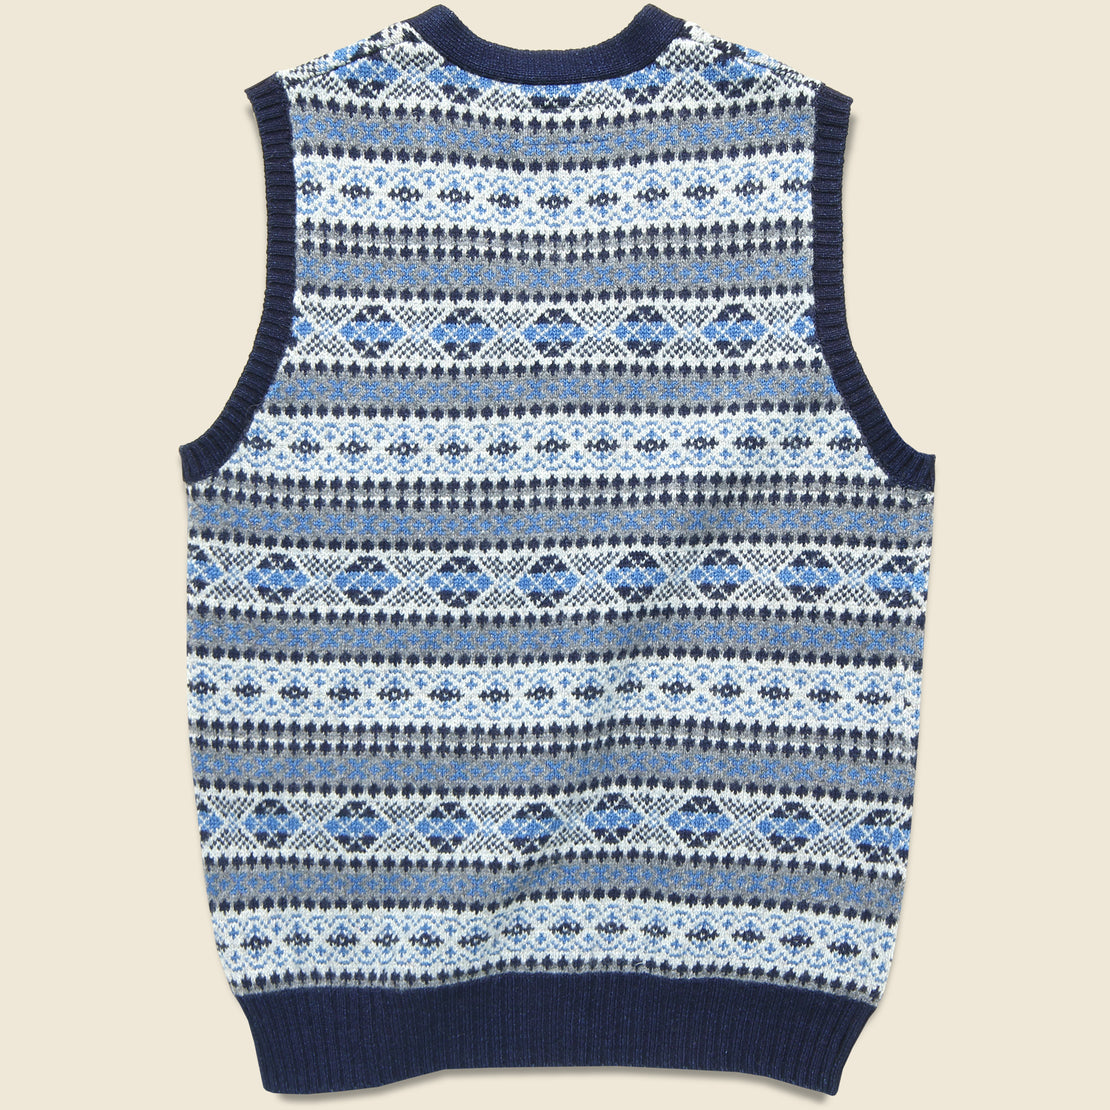 Button Knit Vest - Indigo Fair Isle - BEAMS+ - STAG Provisions - Tops - Sweater